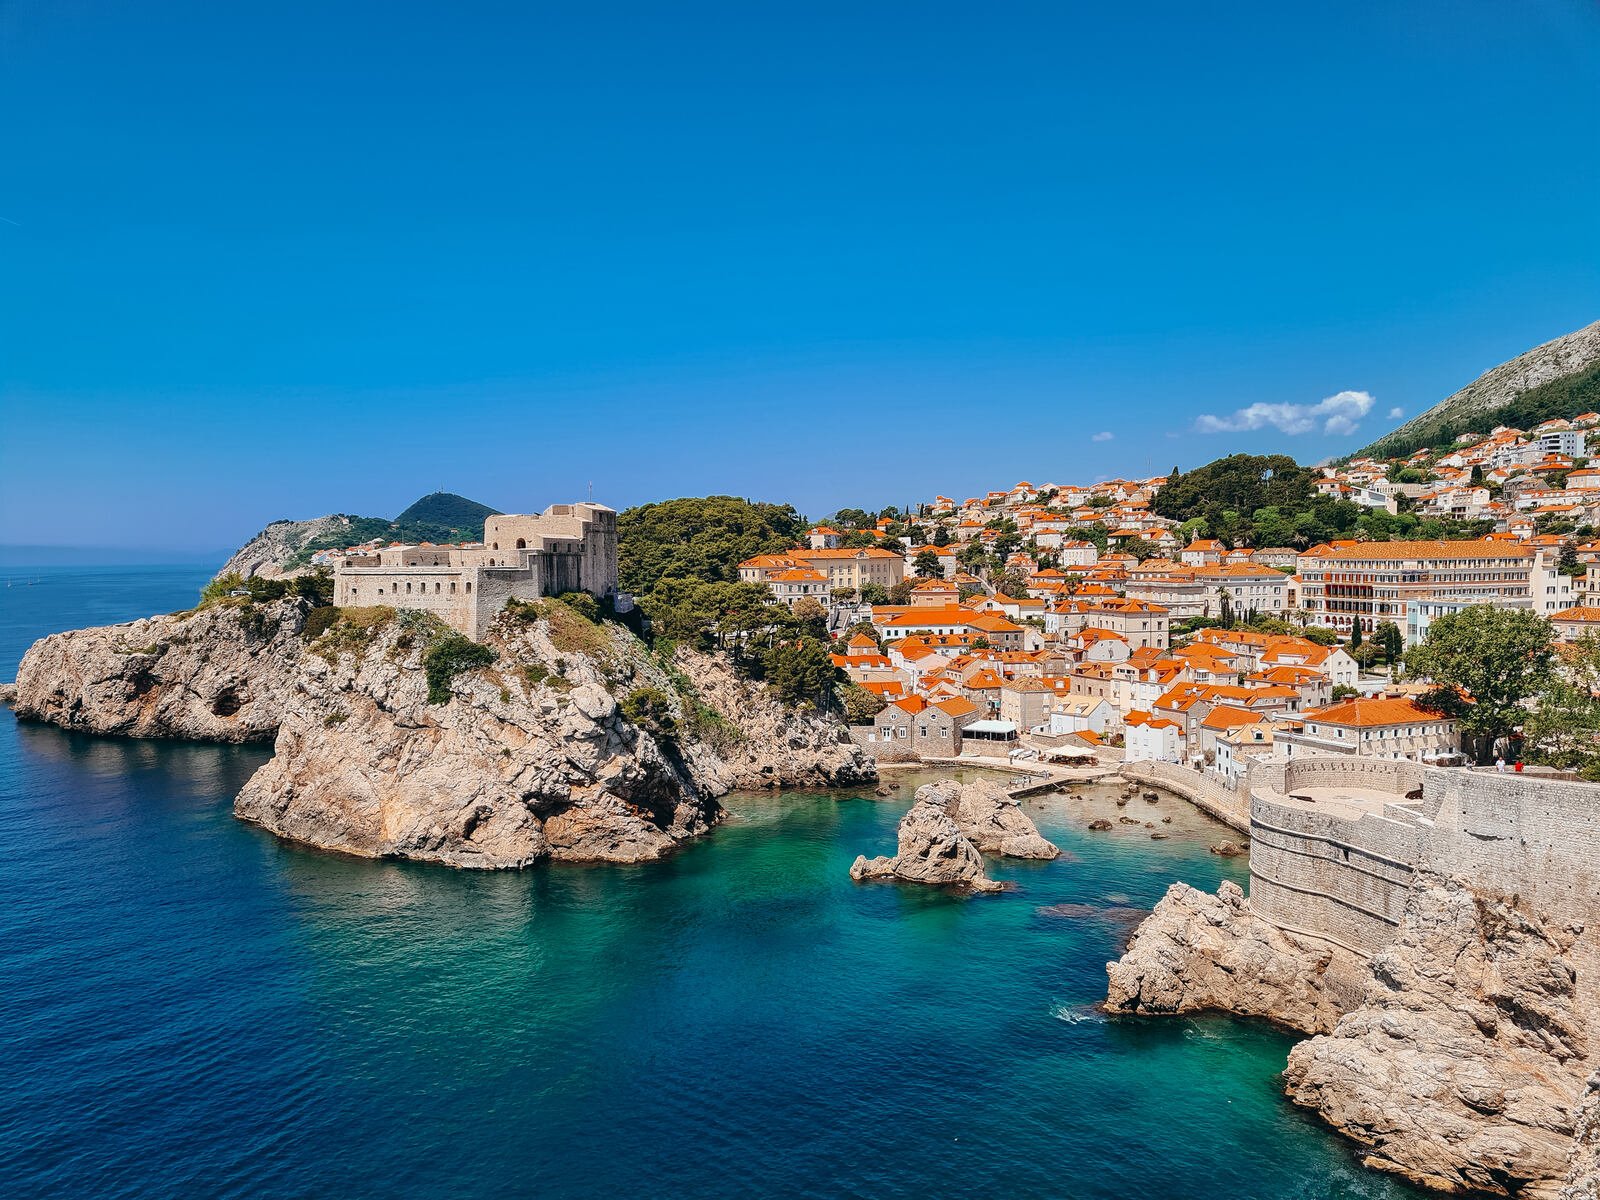 Looking across the coastline of Dubrovnik, a rocky cove can be seen below, stone houses with orange roofs and a large fortress on the top of the cliffs opposite